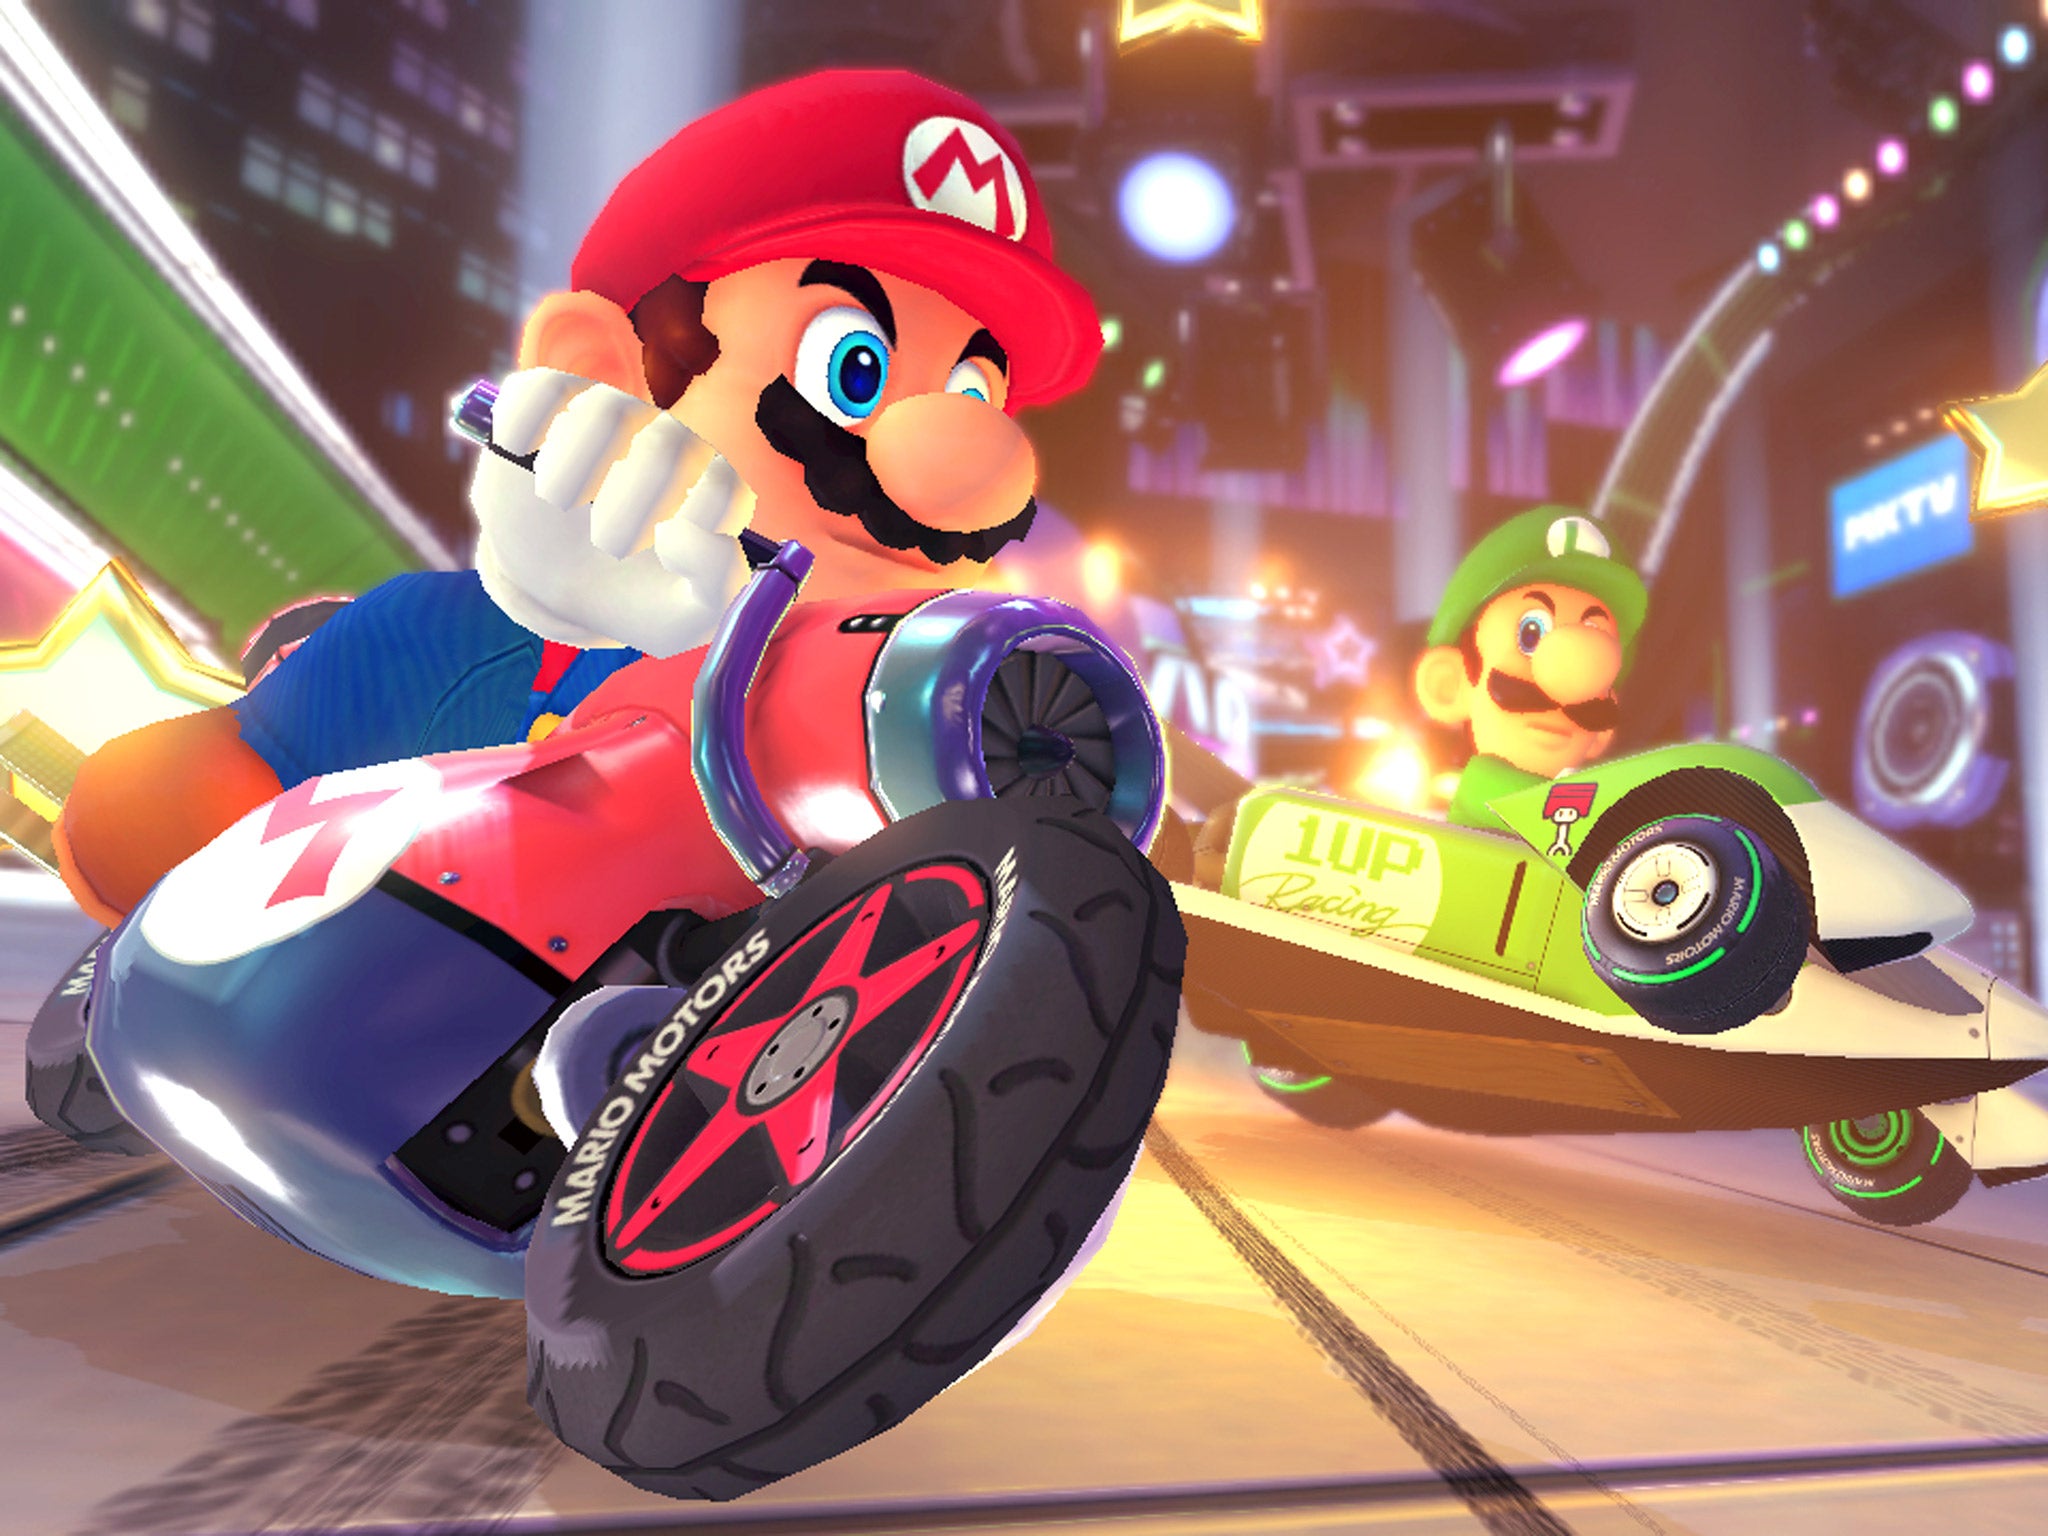 Much-loved characters such as Mario and Luigi have forged the Nintendo brand